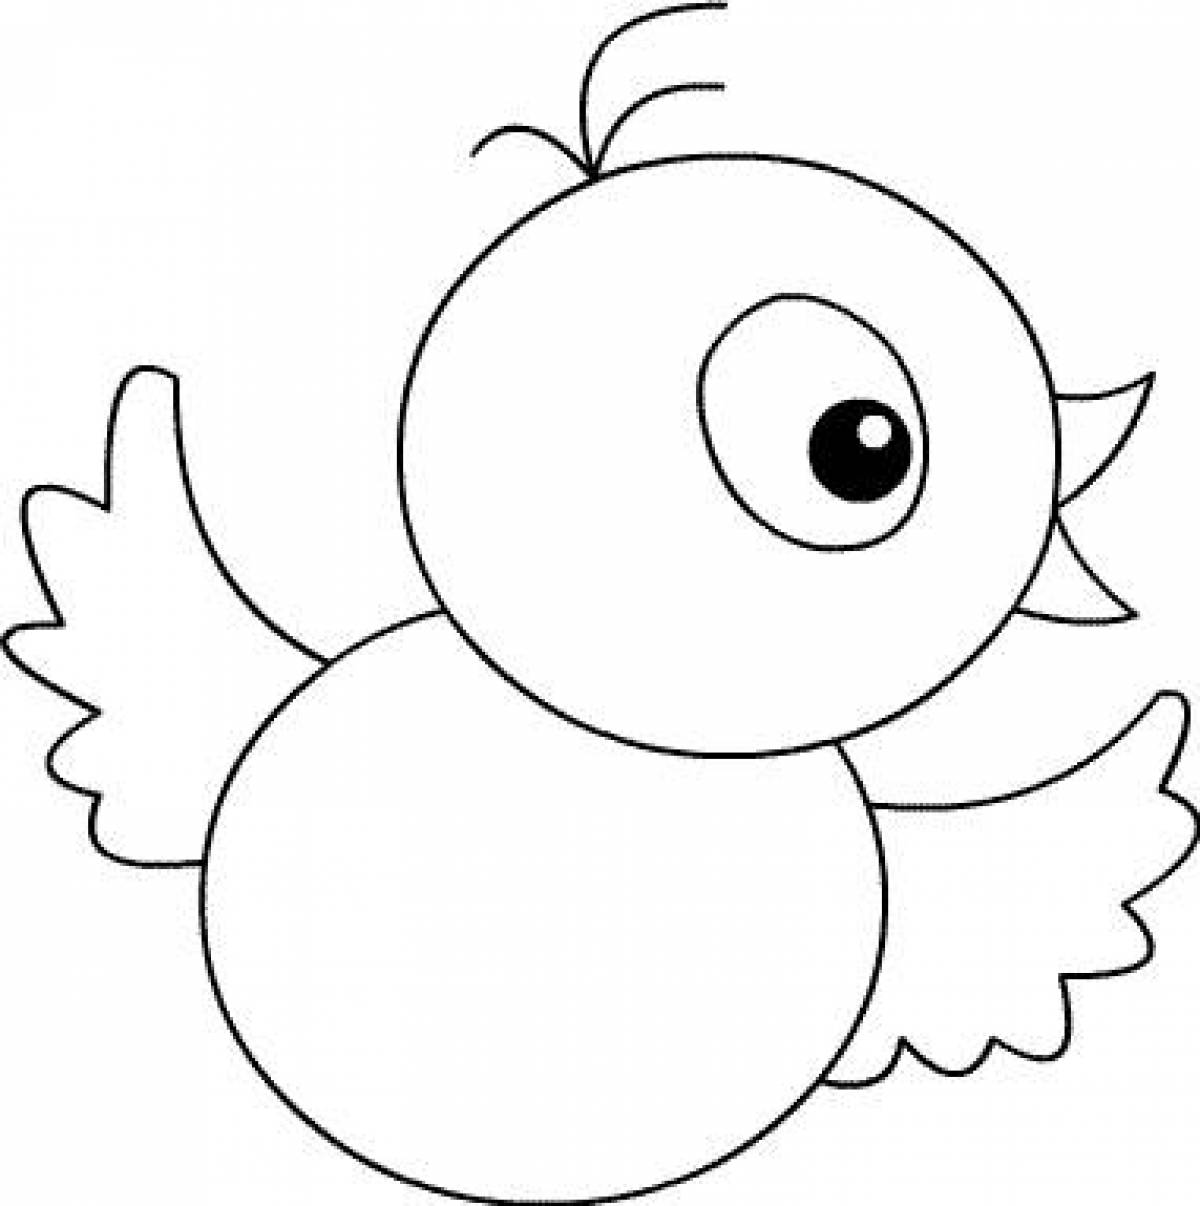 Coloring page nice chick for children 2-3 years old